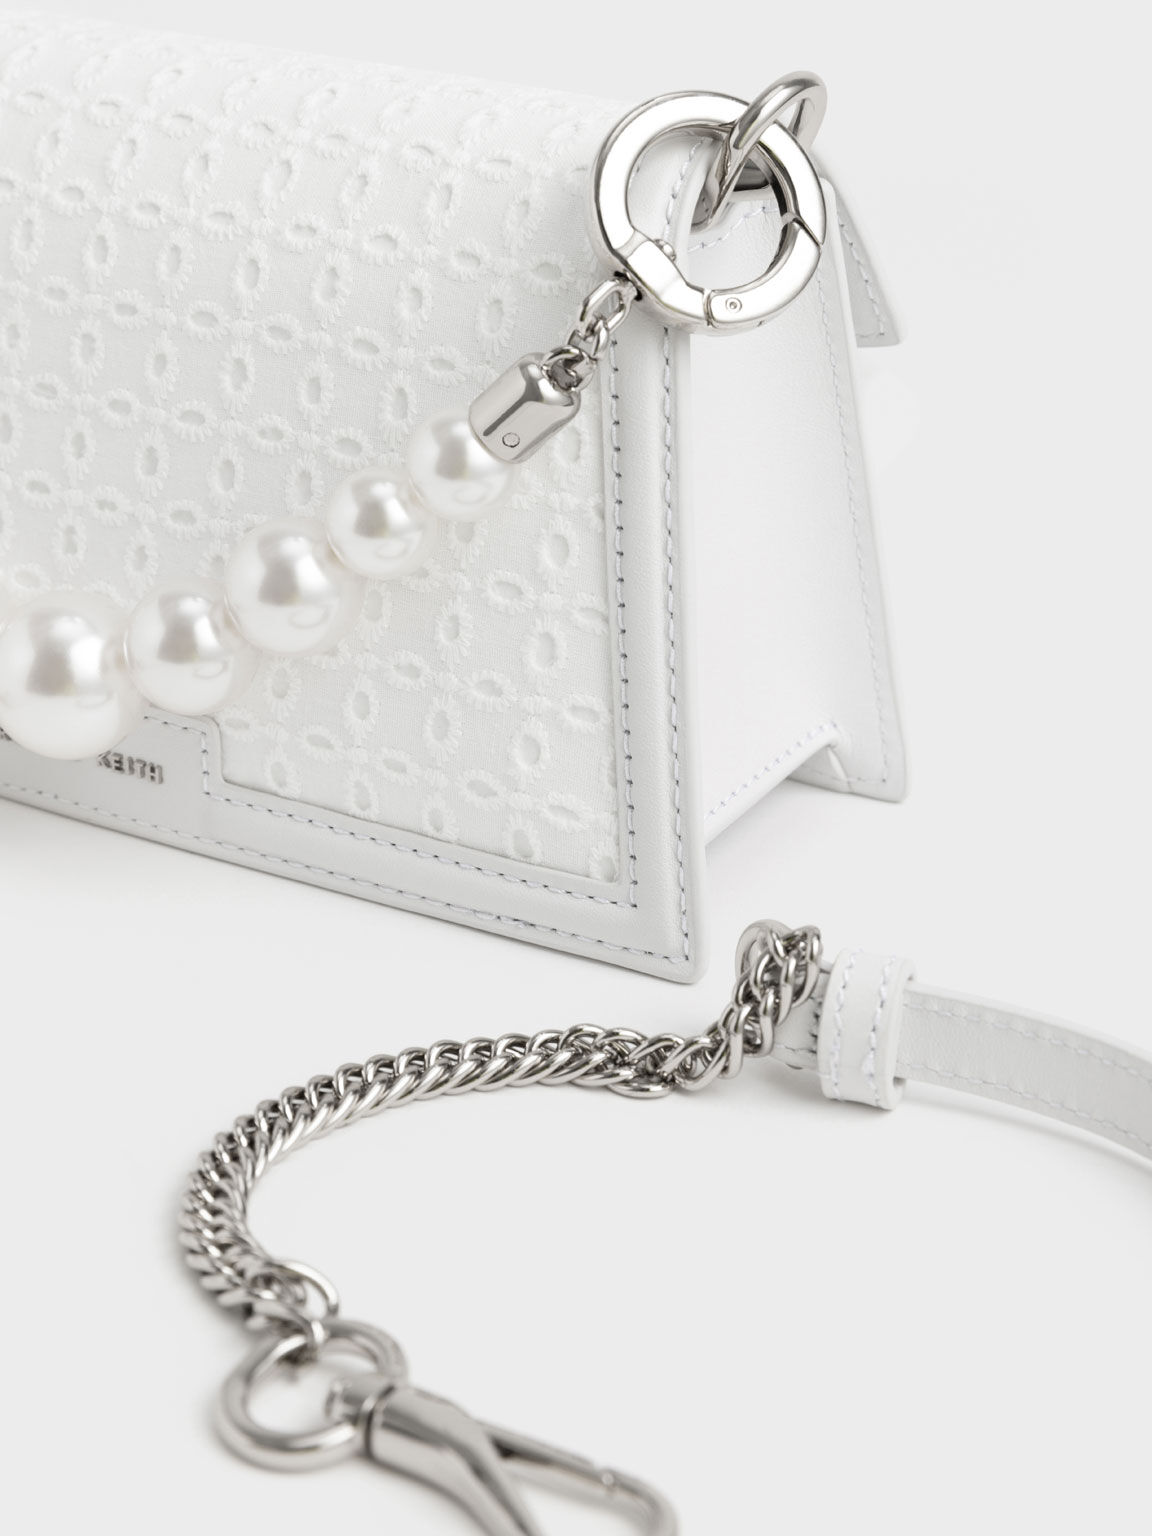 Leather & Lace Bead-Handle Bag, White, hi-res